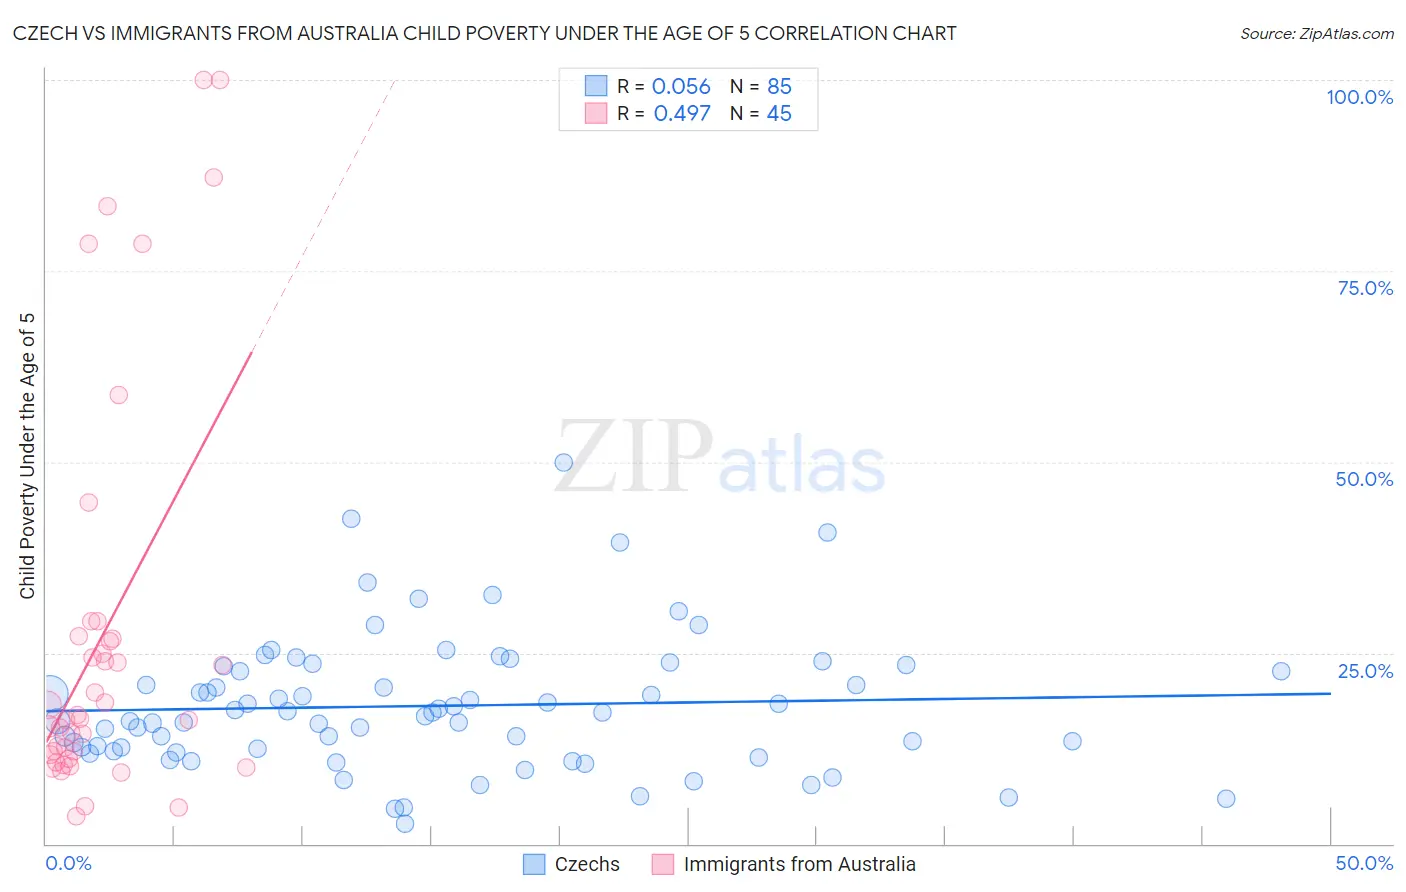 Czech vs Immigrants from Australia Child Poverty Under the Age of 5